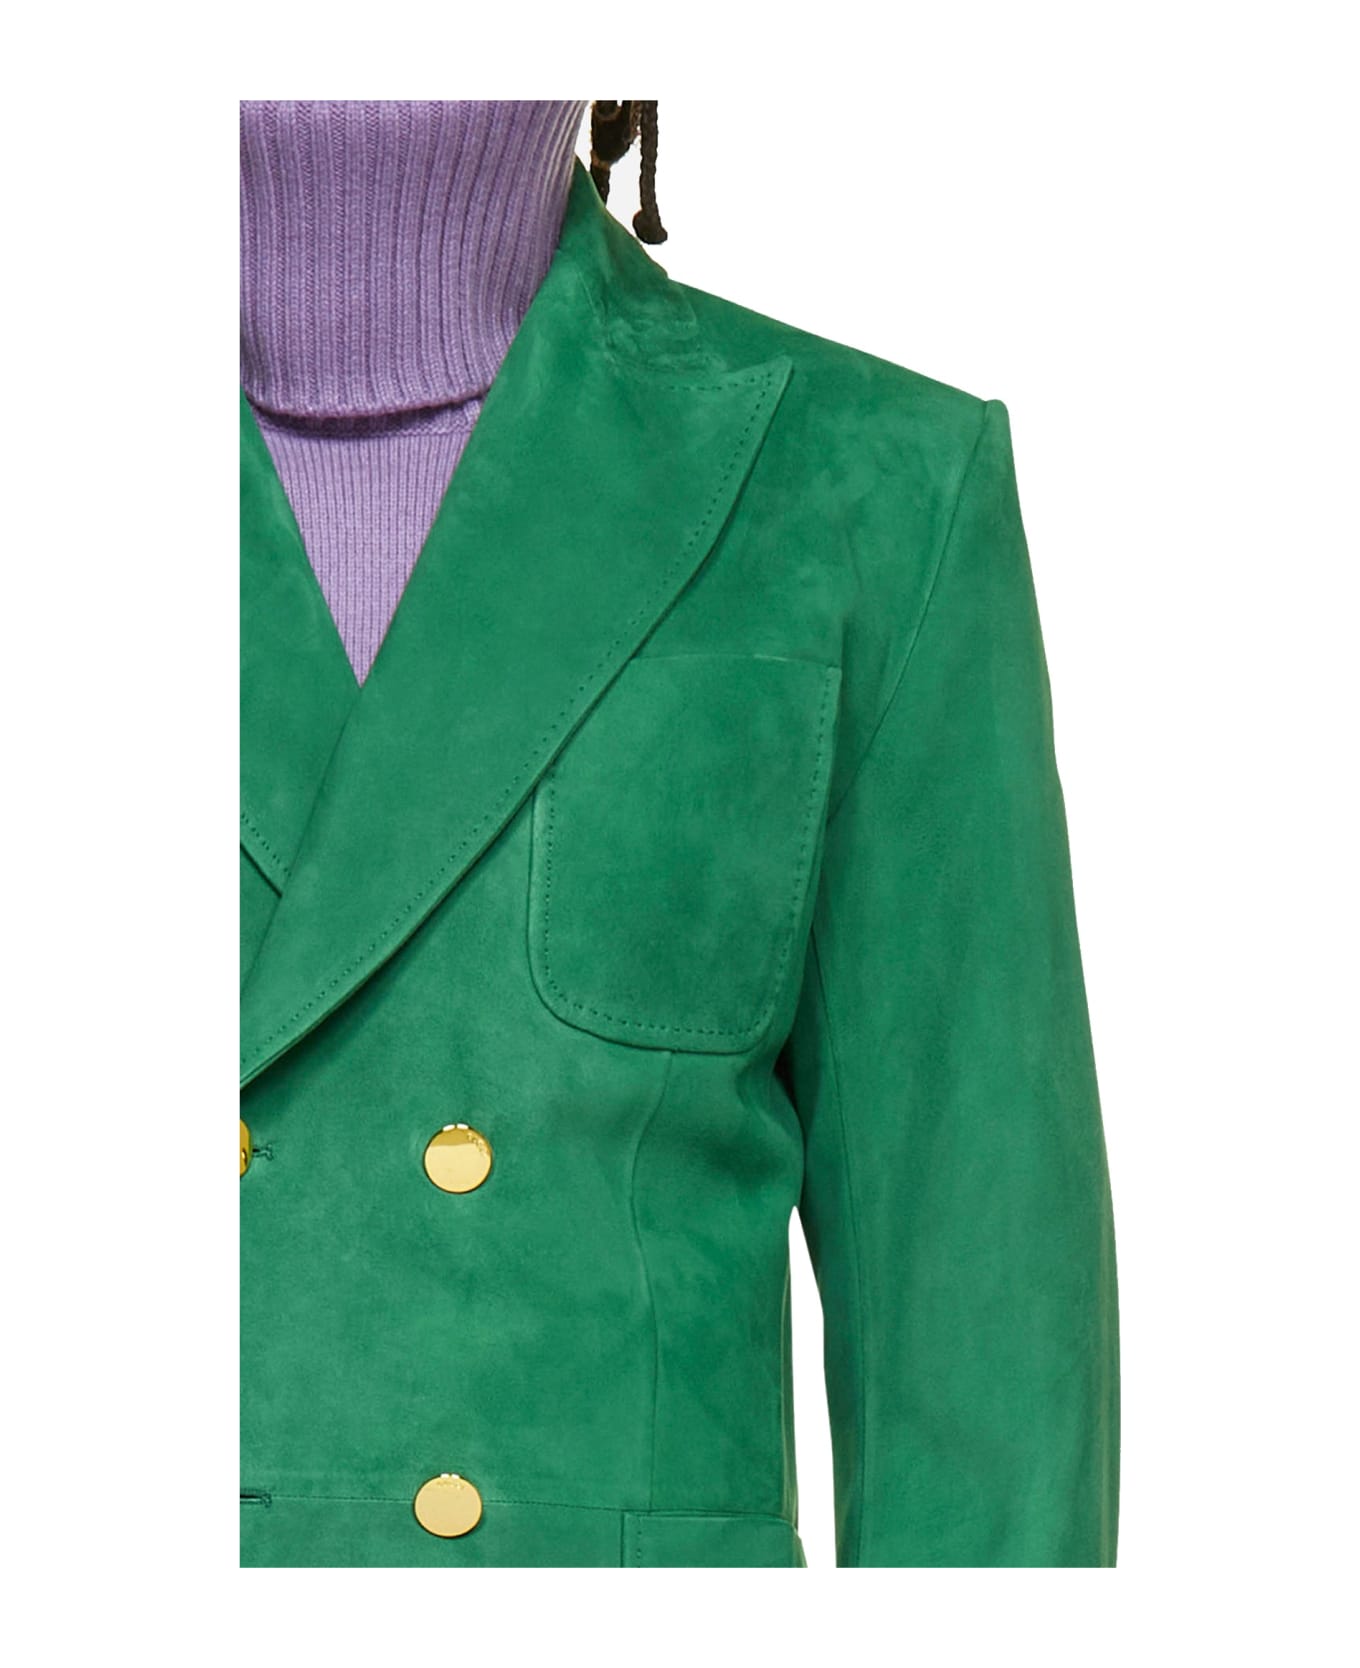 Gucci Suede Jacket - Green ブレザー